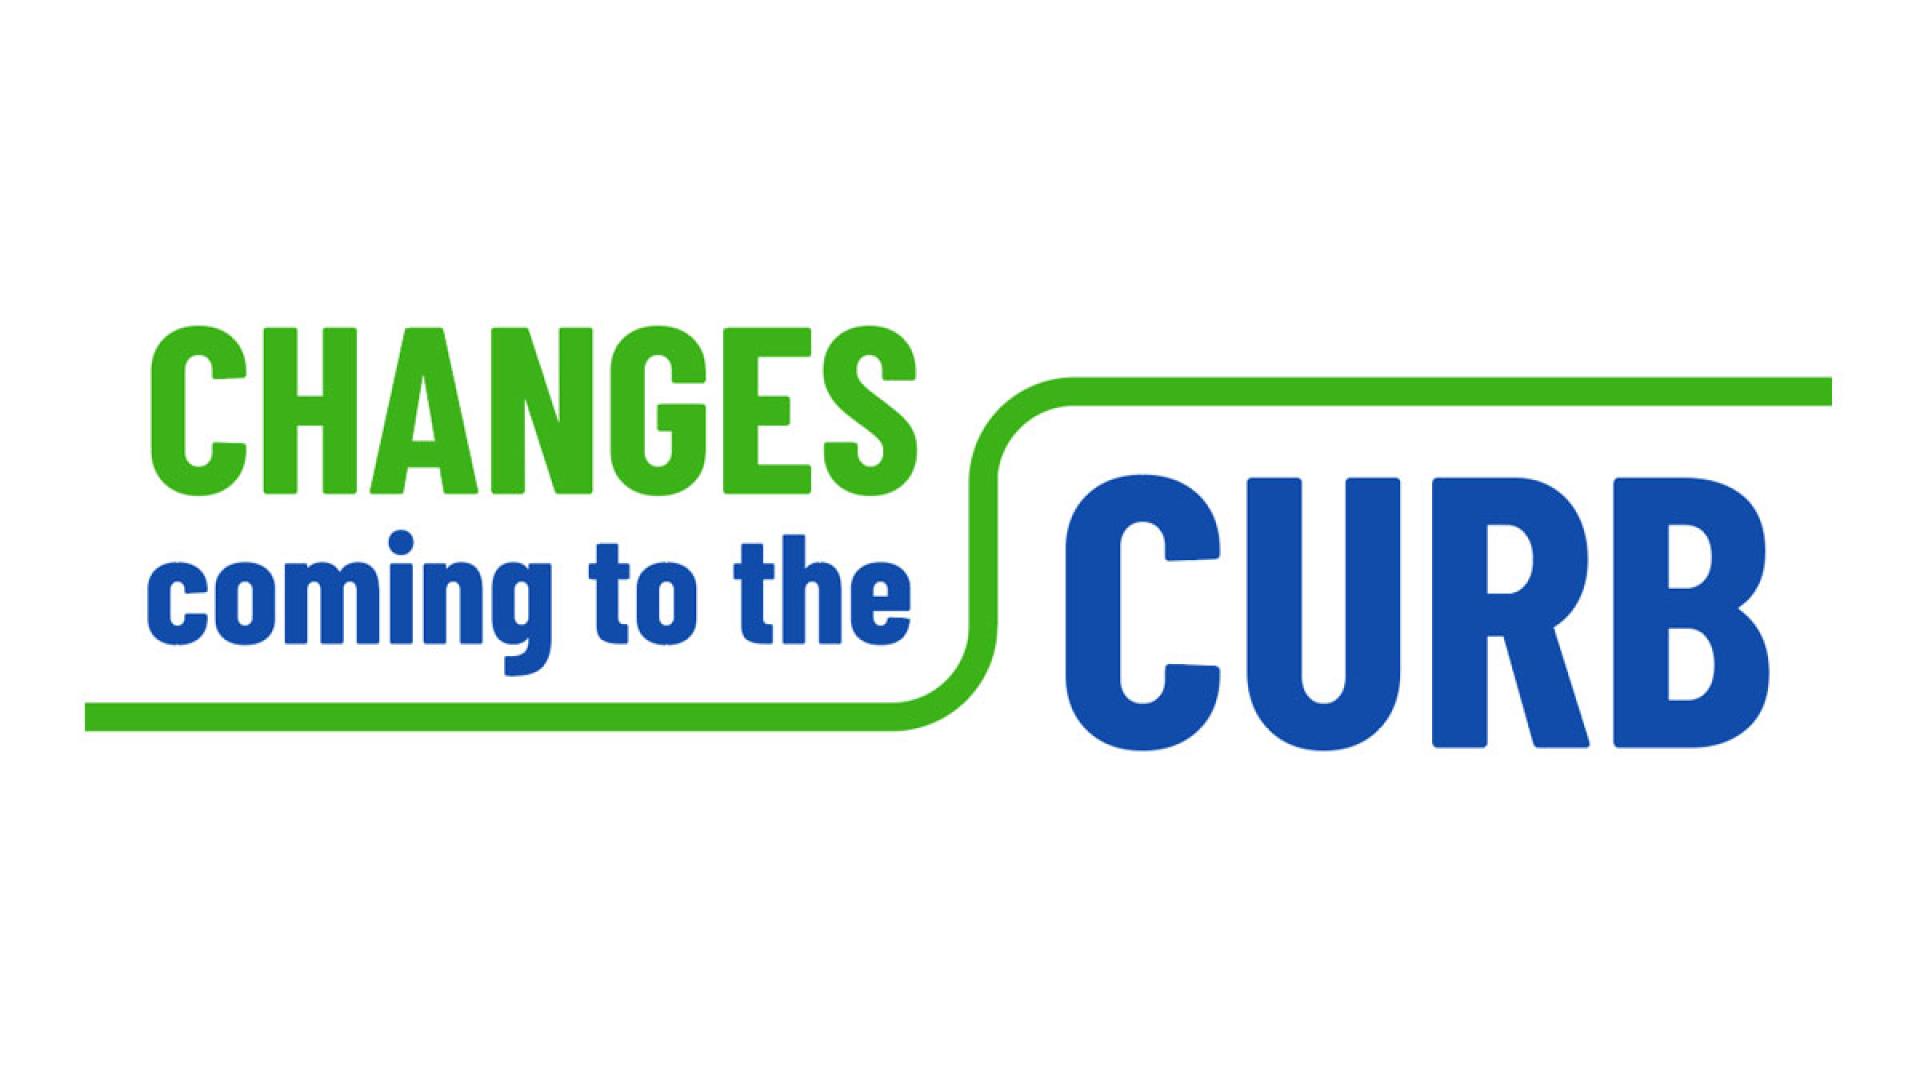 Changes coming to the curb